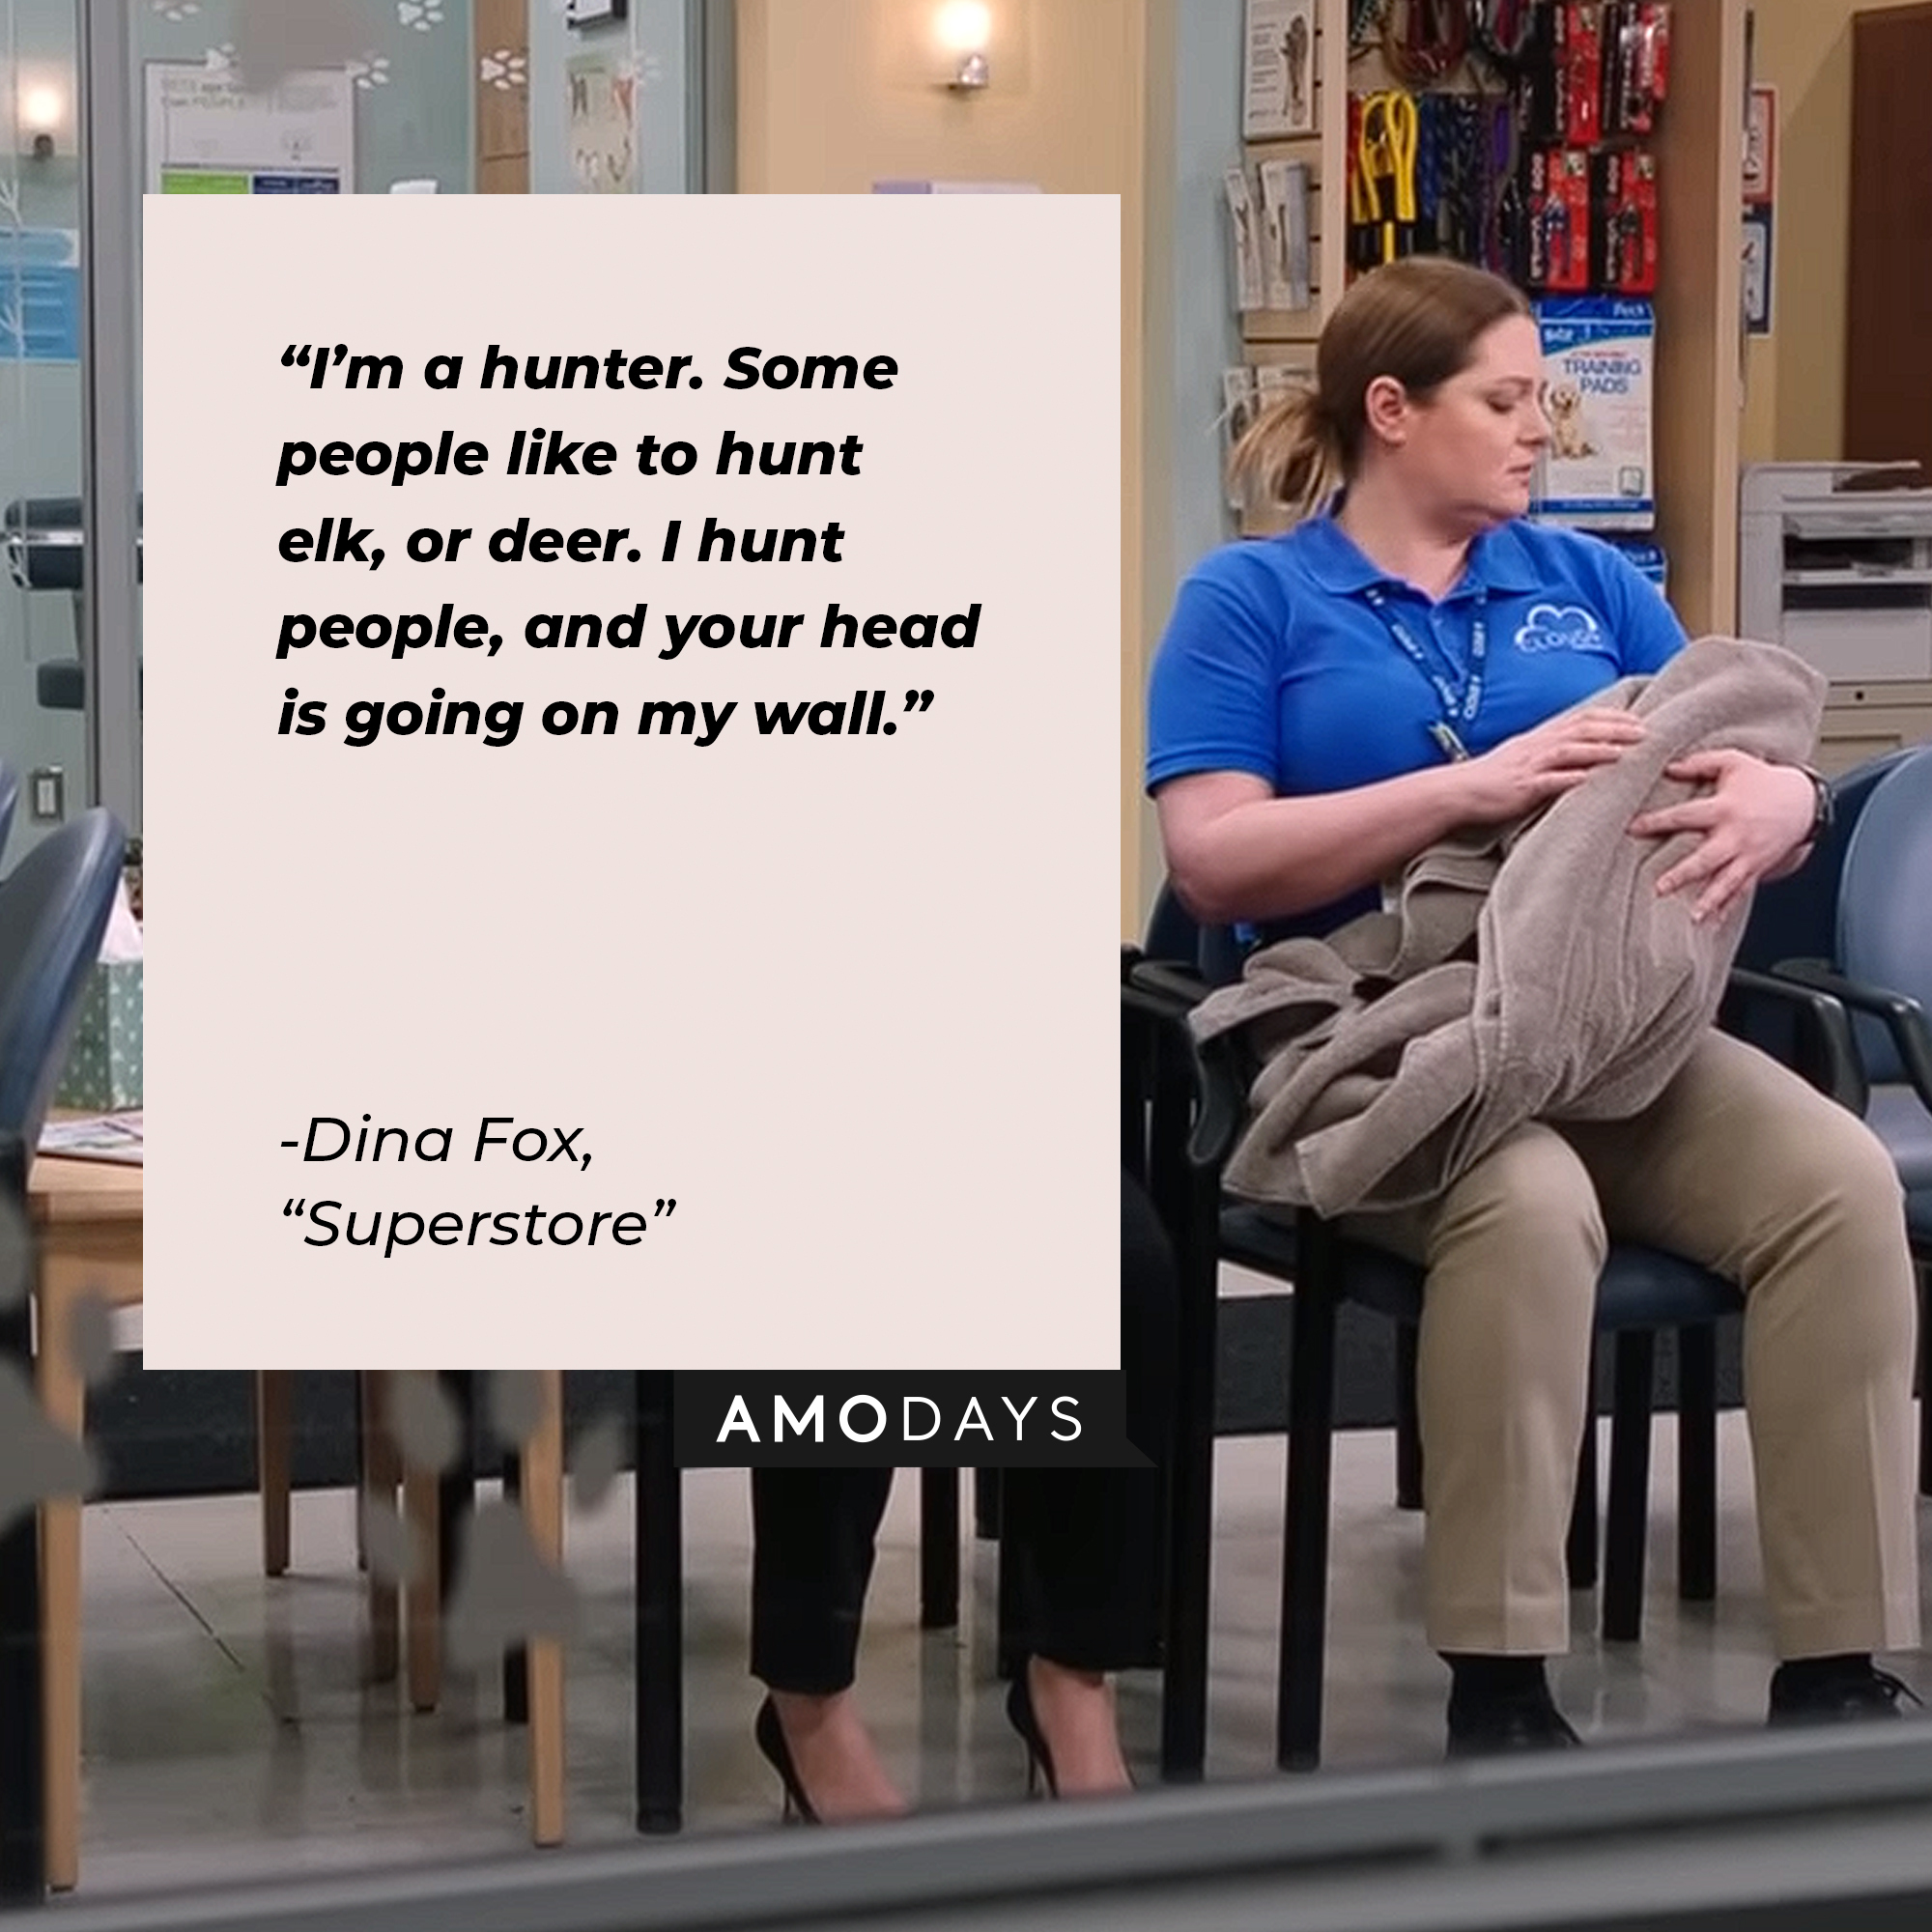 Image of Dina Fox with the quote: “I’m a hunter. Some people like to hunt elk, or deer. I hunt people, and your head is going on my wall.” | Source: Youtube.com/NBCSuperstore